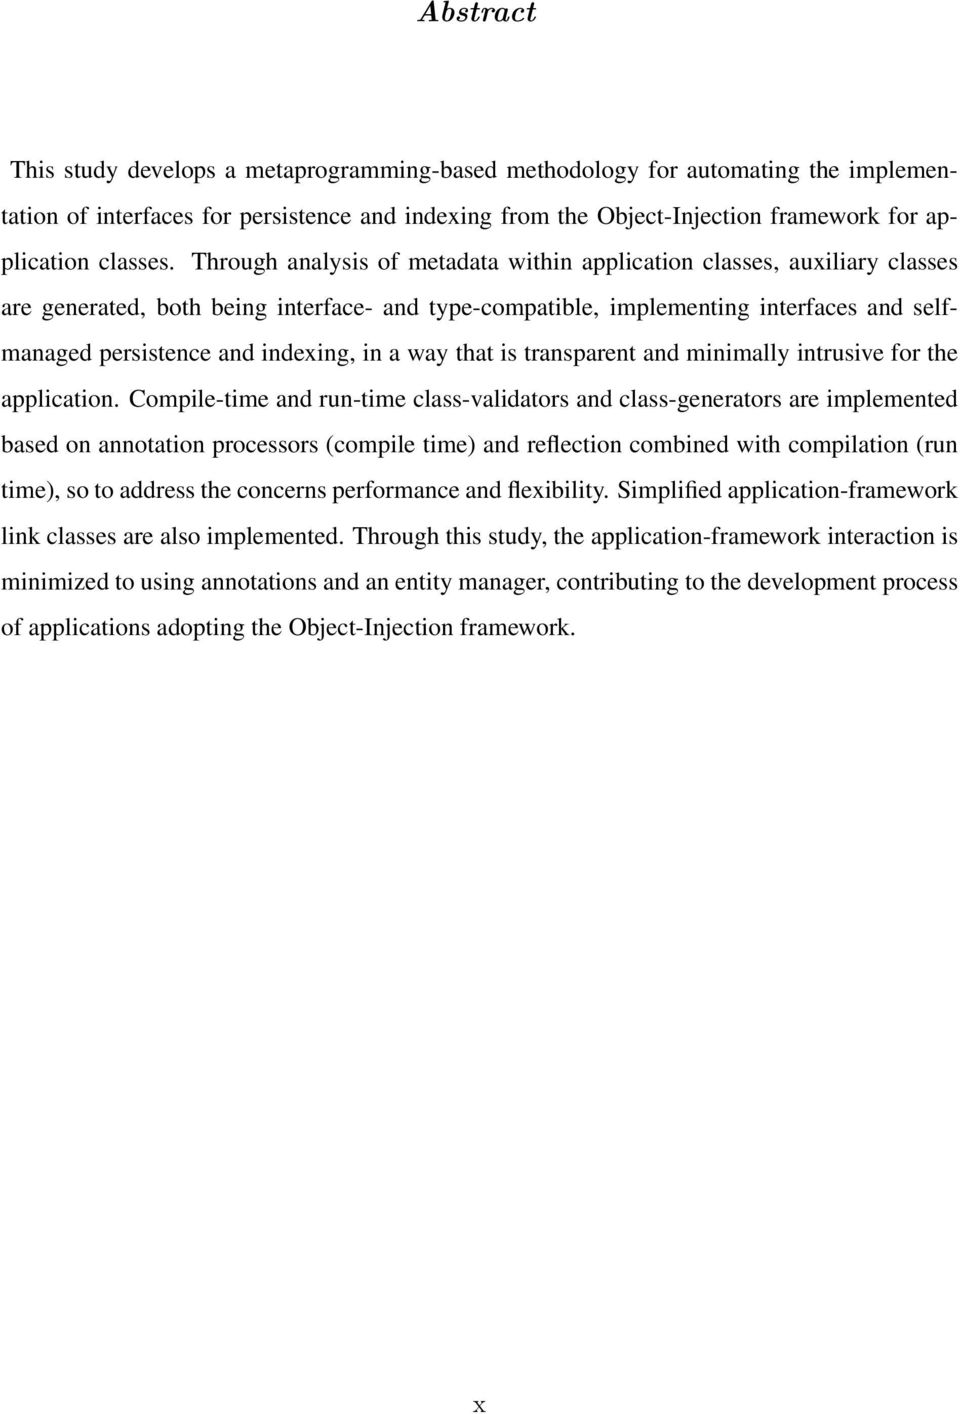 Through analysis of metadata within application classes, auxiliary classes are generated, both being interface- and type-compatible, implementing interfaces and selfmanaged persistence and indexing,